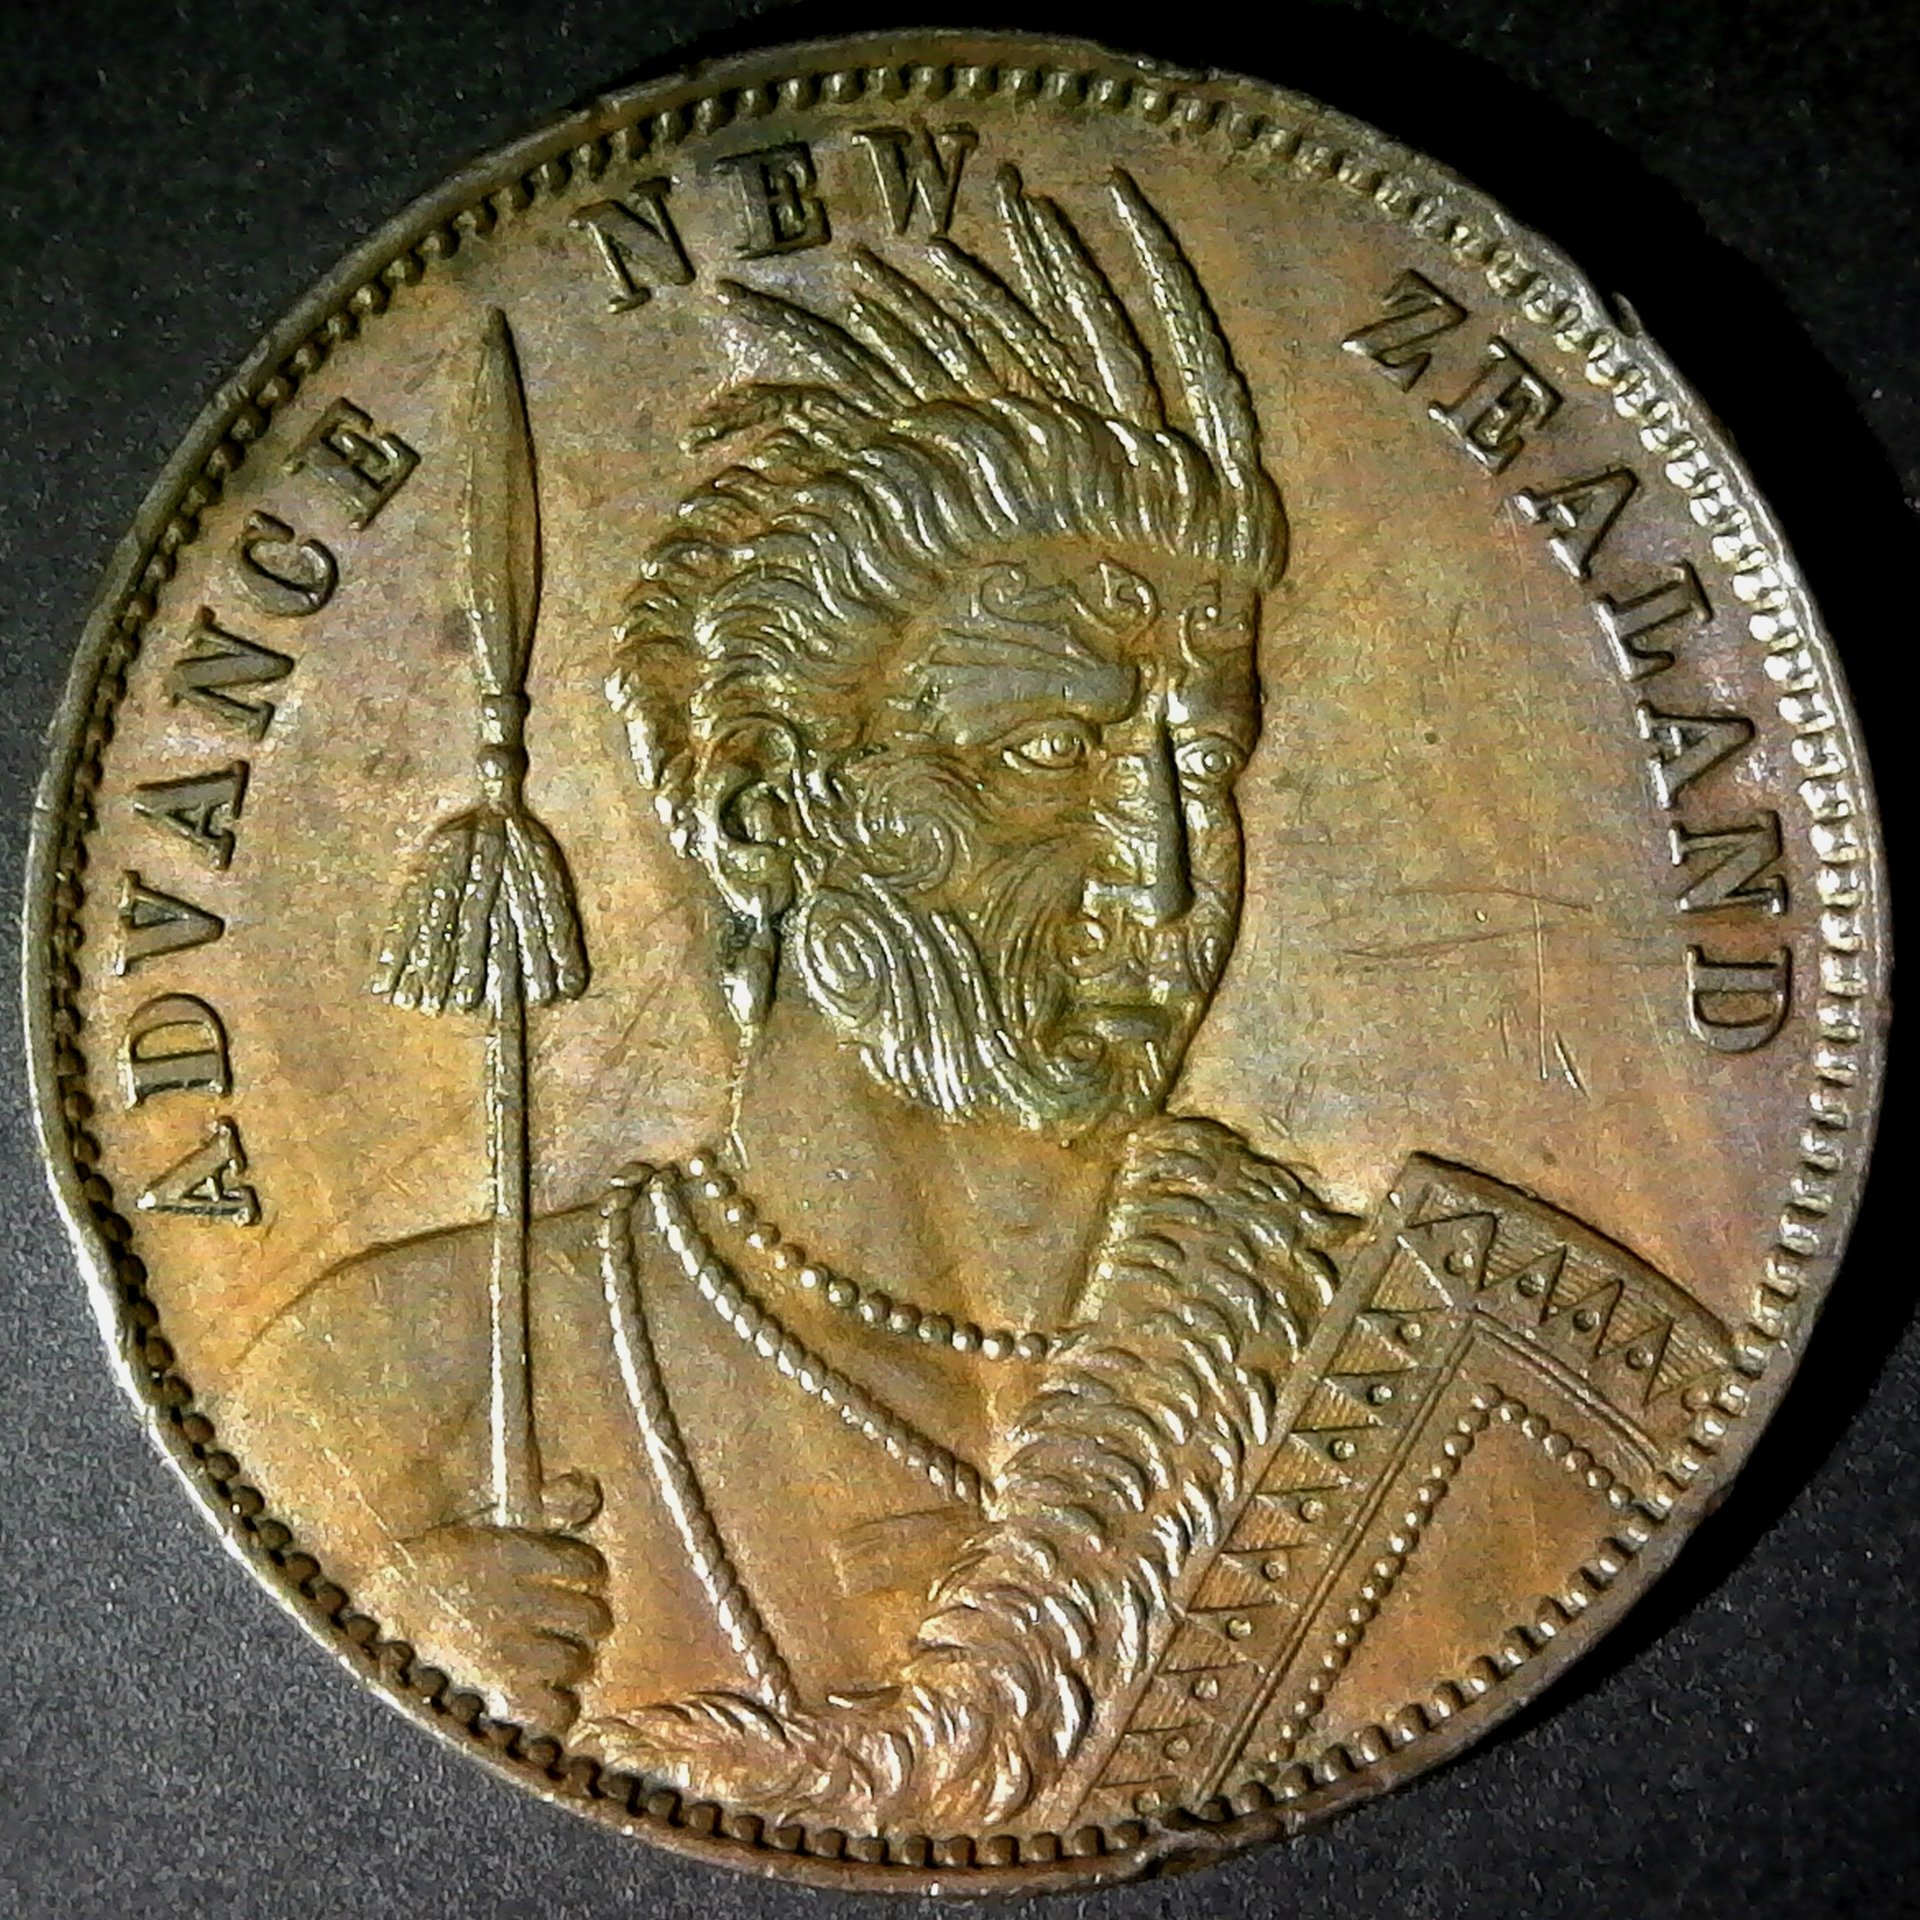 New Zealand Aukland Milner and Thompson Penny 1881 obverse.jpg